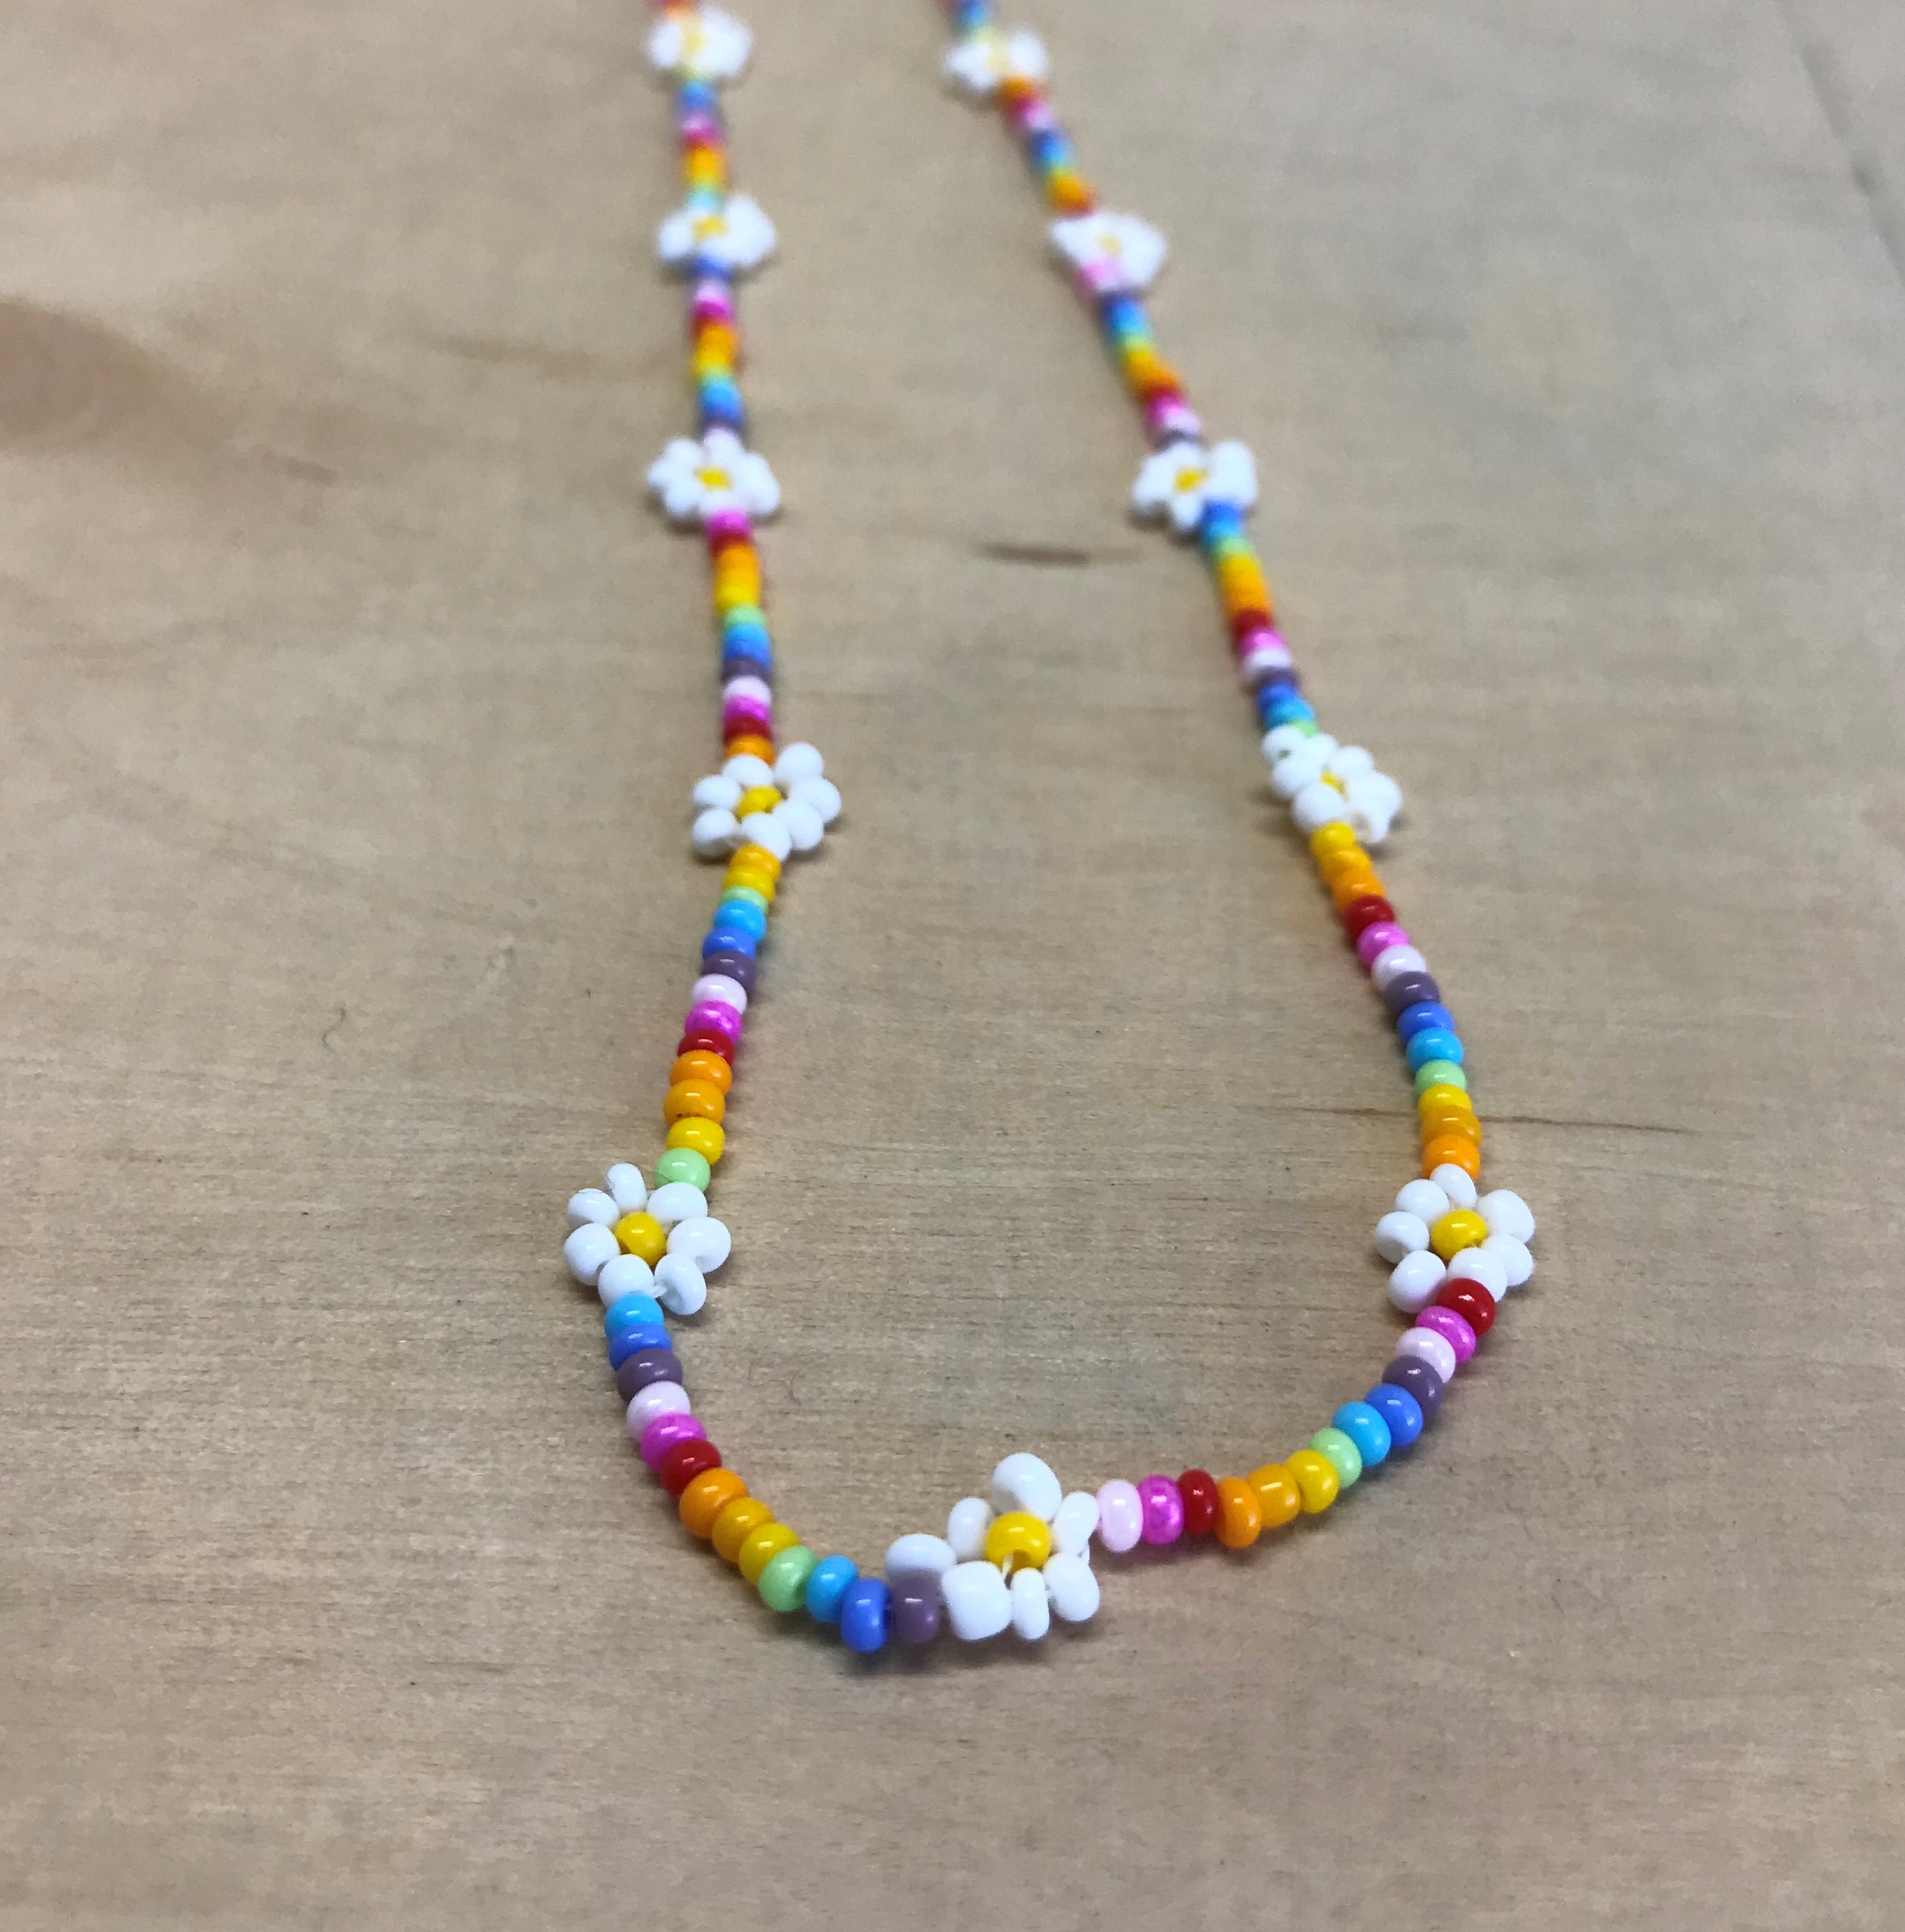 Daisy Chain Necklace. Seed Bead Rainbow Flower Necklace Jewelry. Made